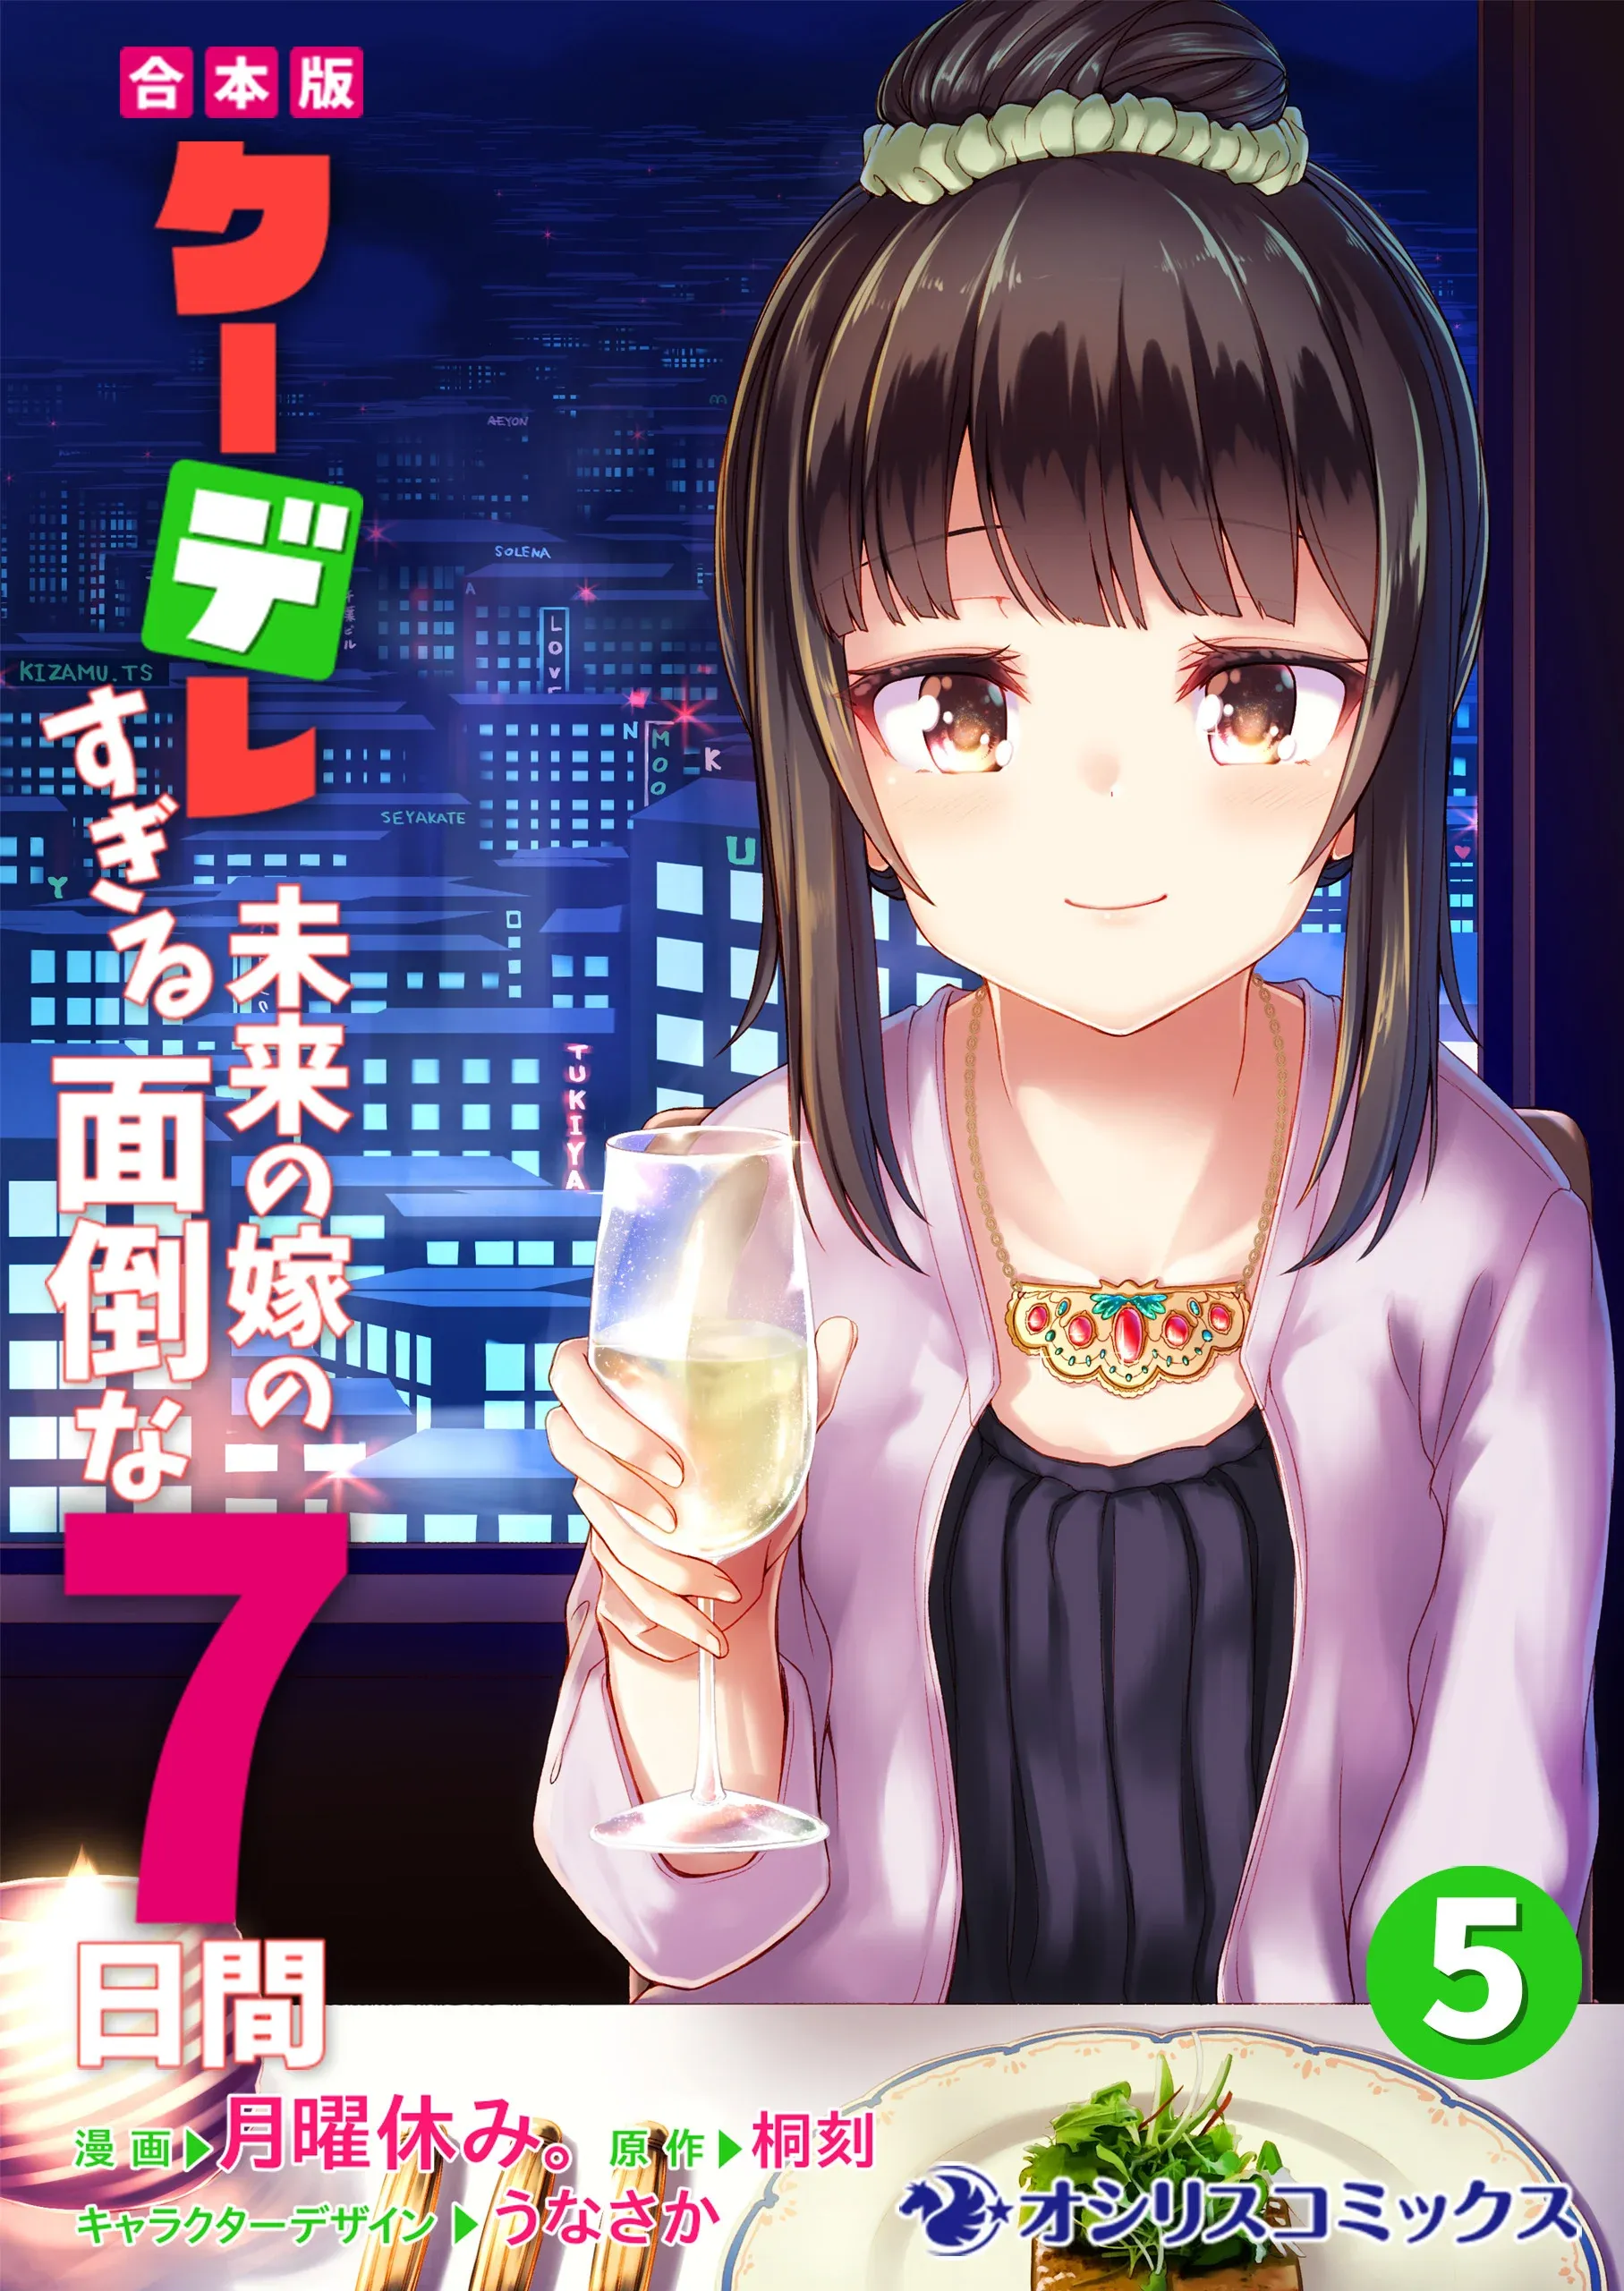 7 troublesome days with the future bride who is too kuudere